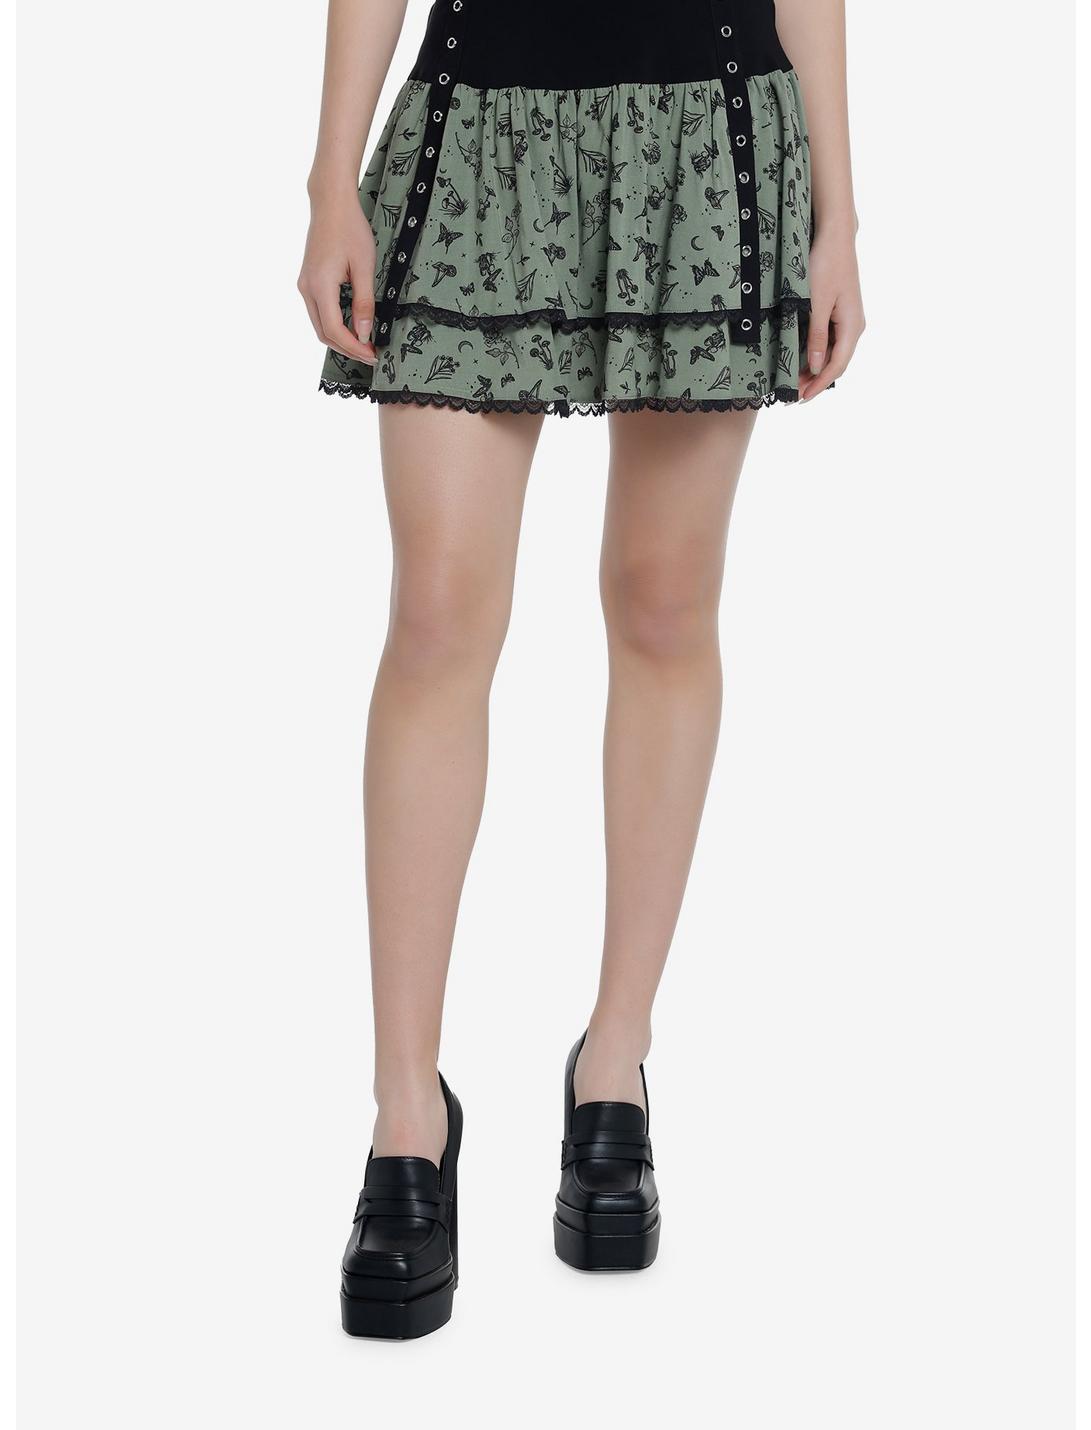 Thorn & Fable Green Butterfly Mushroom Tiered Skirt, BLACK, hi-res